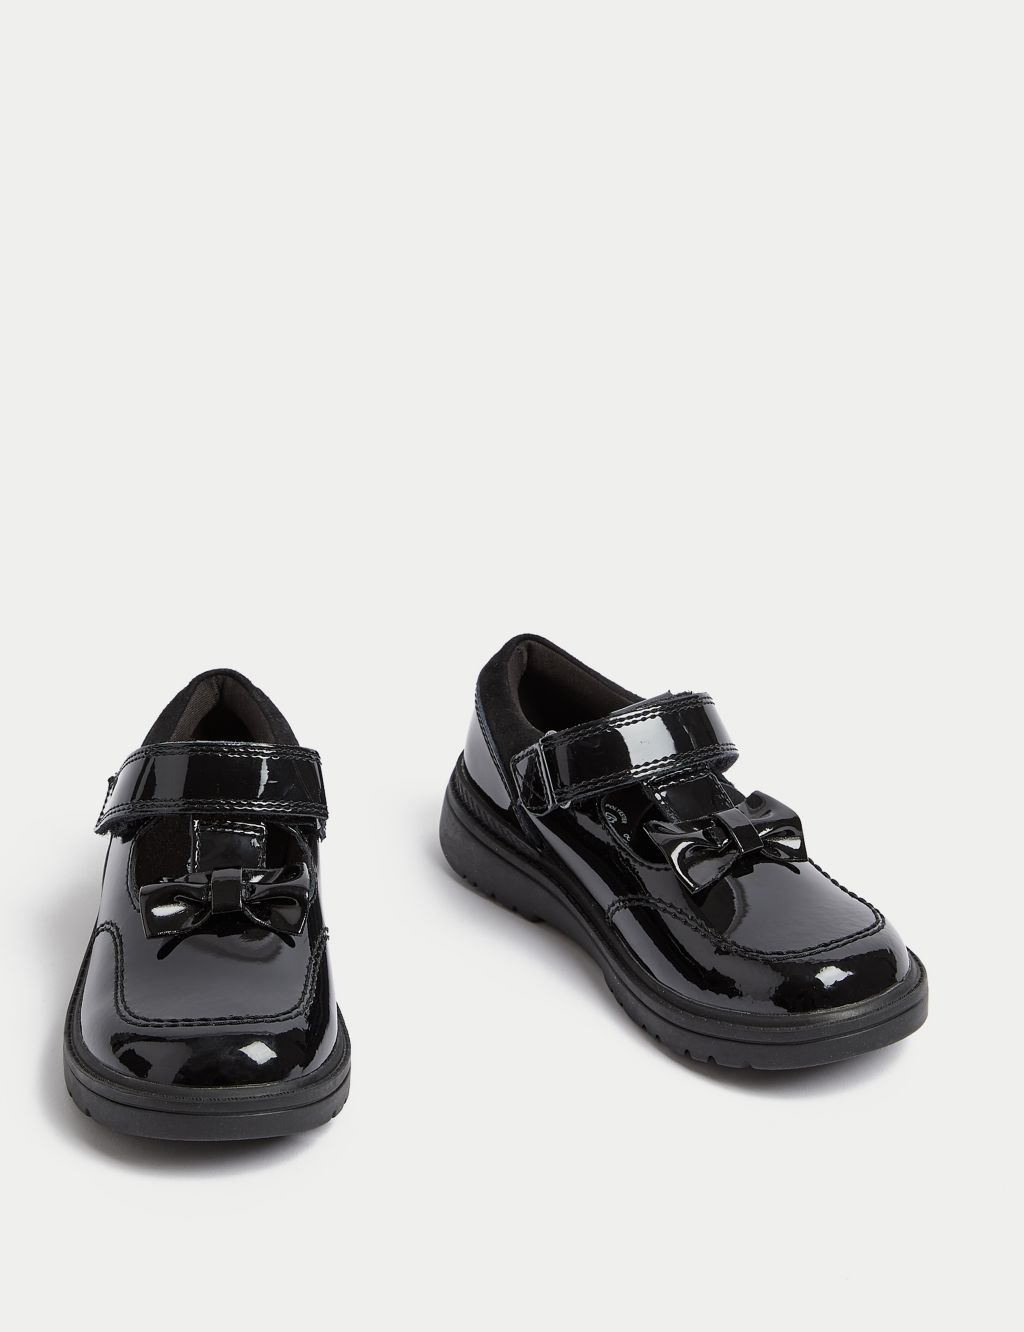 Kids’ Leather T-Bar School Shoes (8 Small - 1 Large) | M&S Collection | M&S